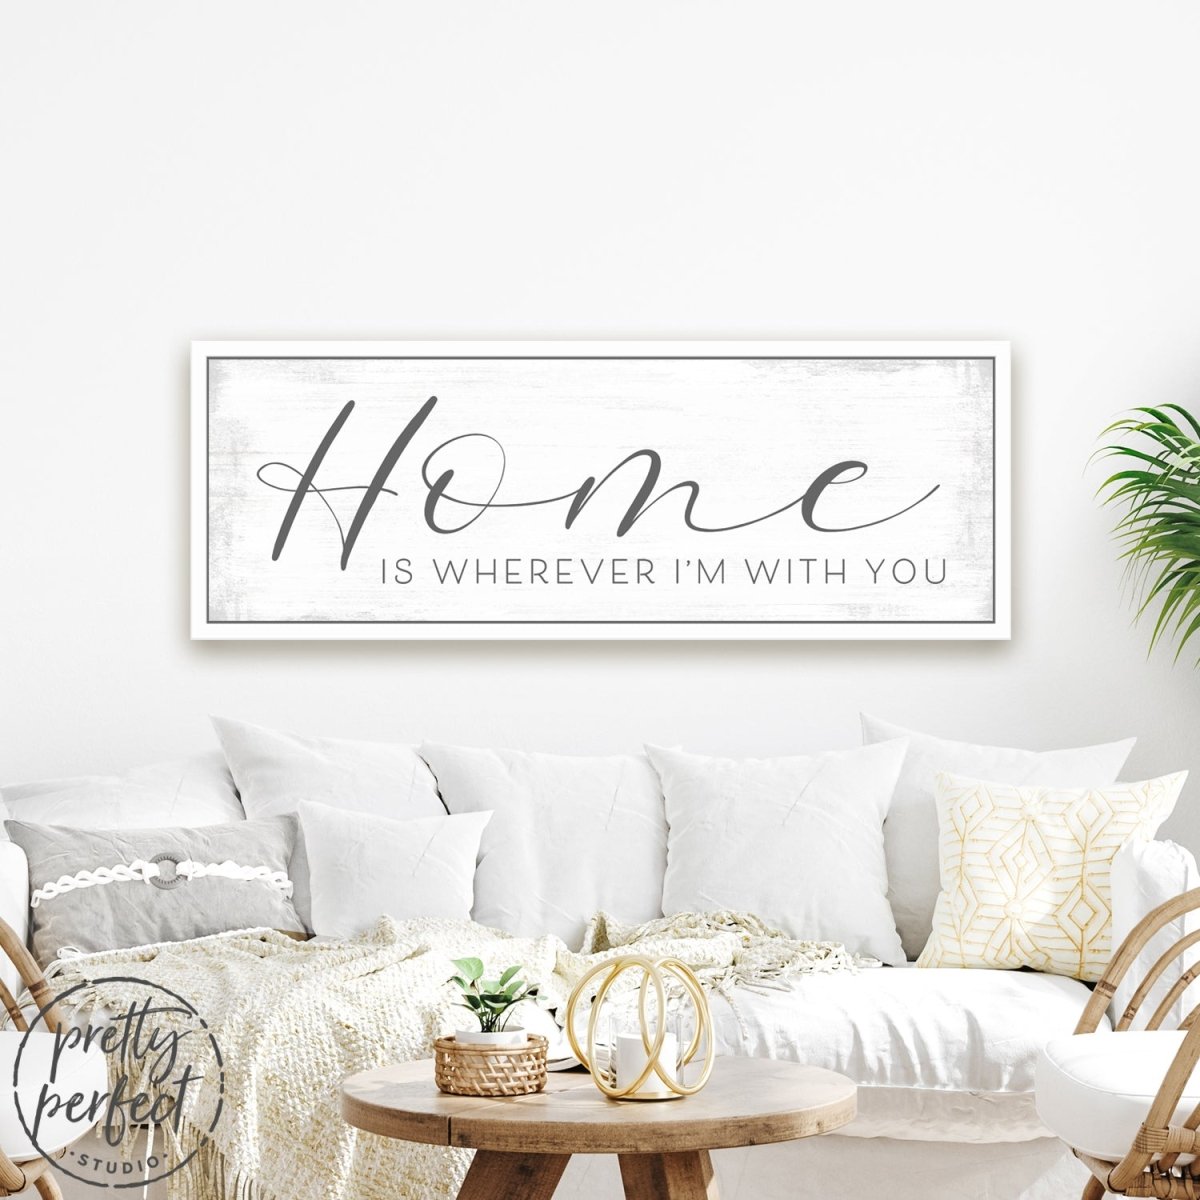 Home Is Wherever I'm With You Sign Above Couch - Pretty Perfect Studio